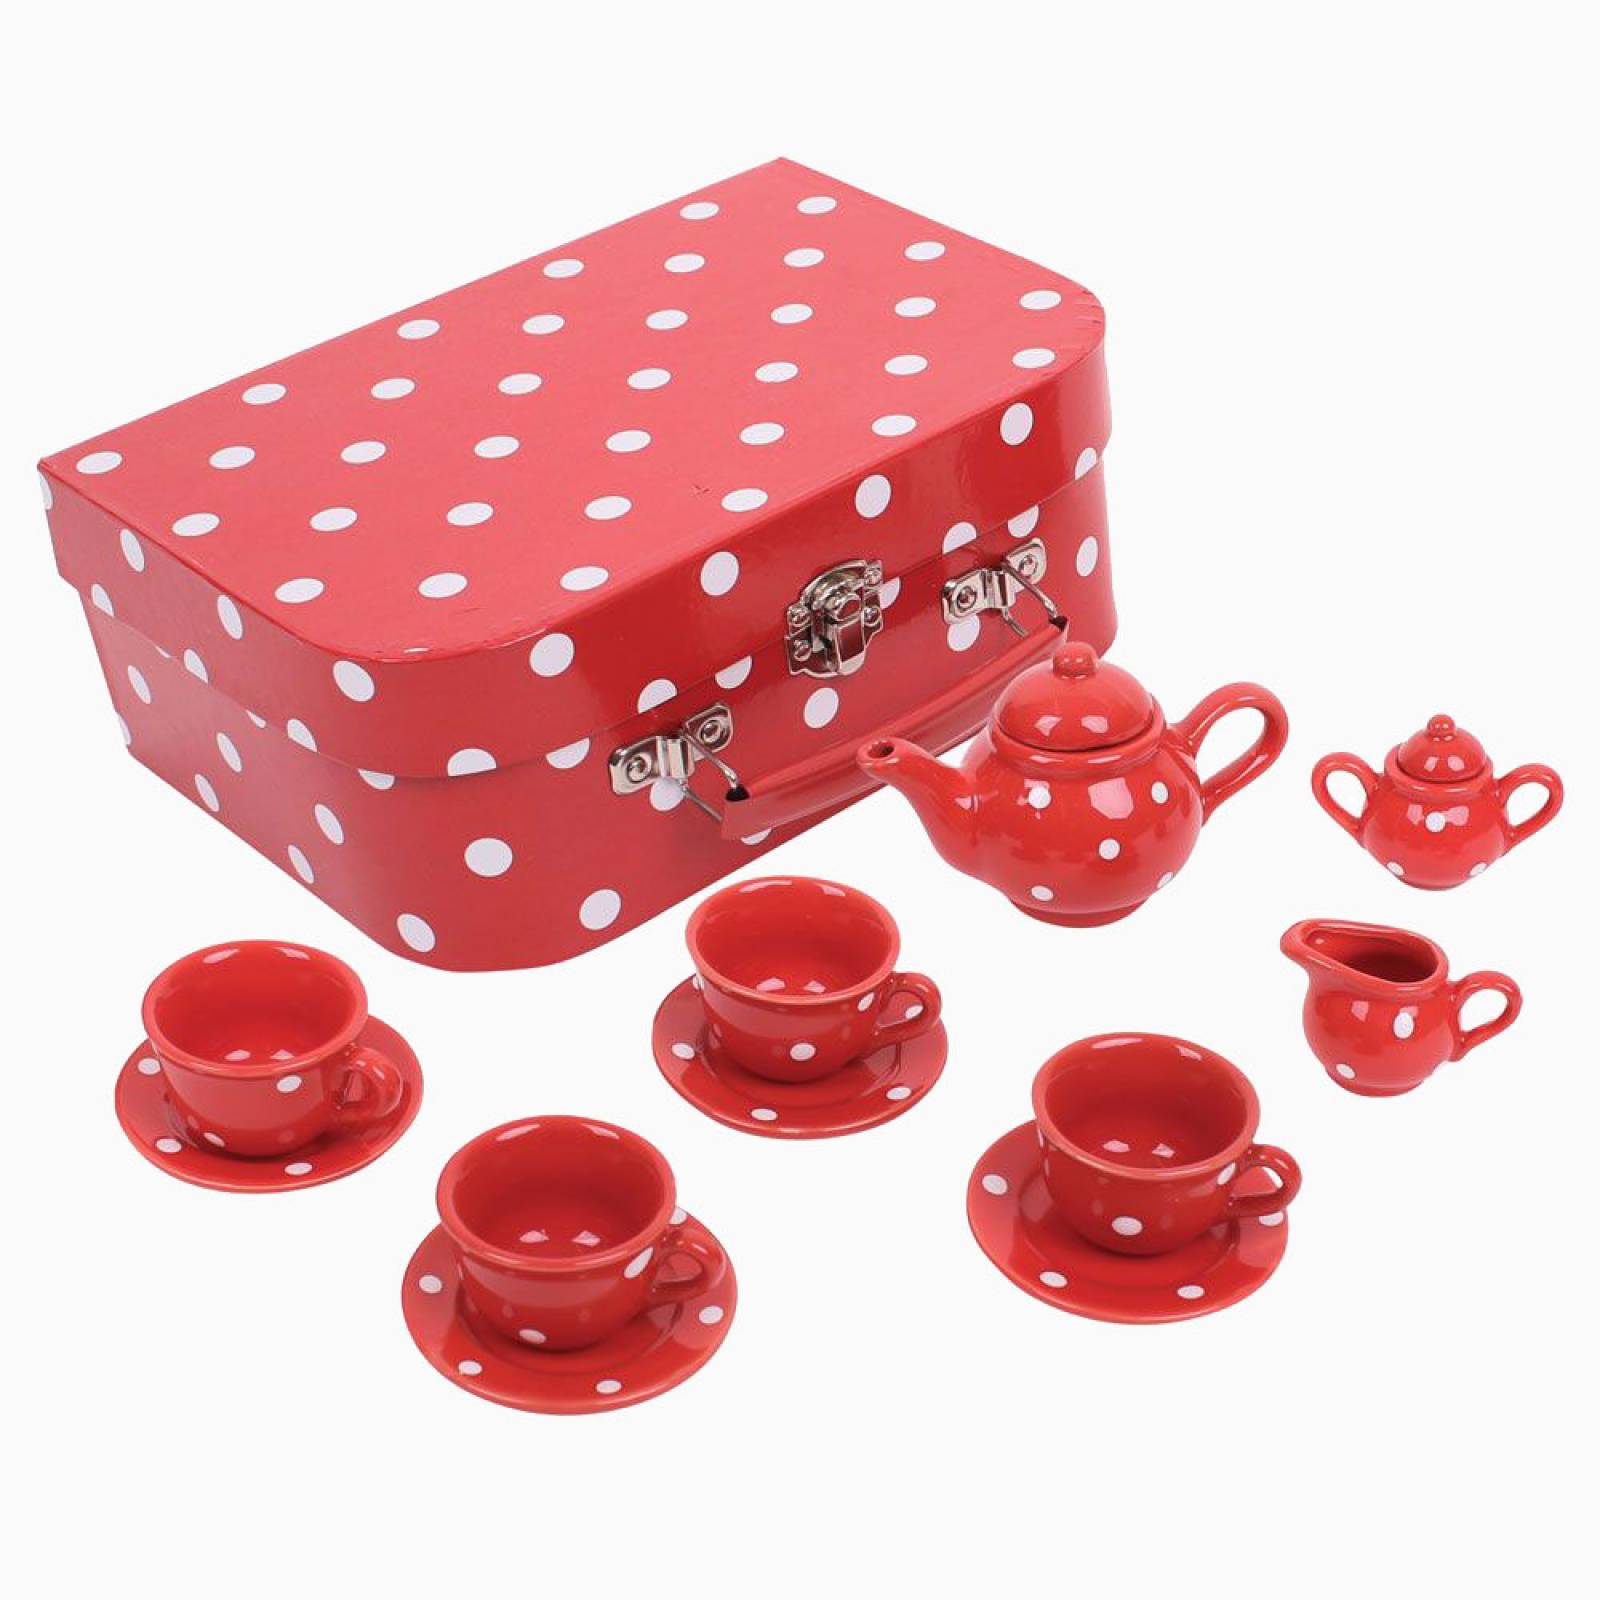 Red And White Spot Porcelain Tea Set In Case 3+